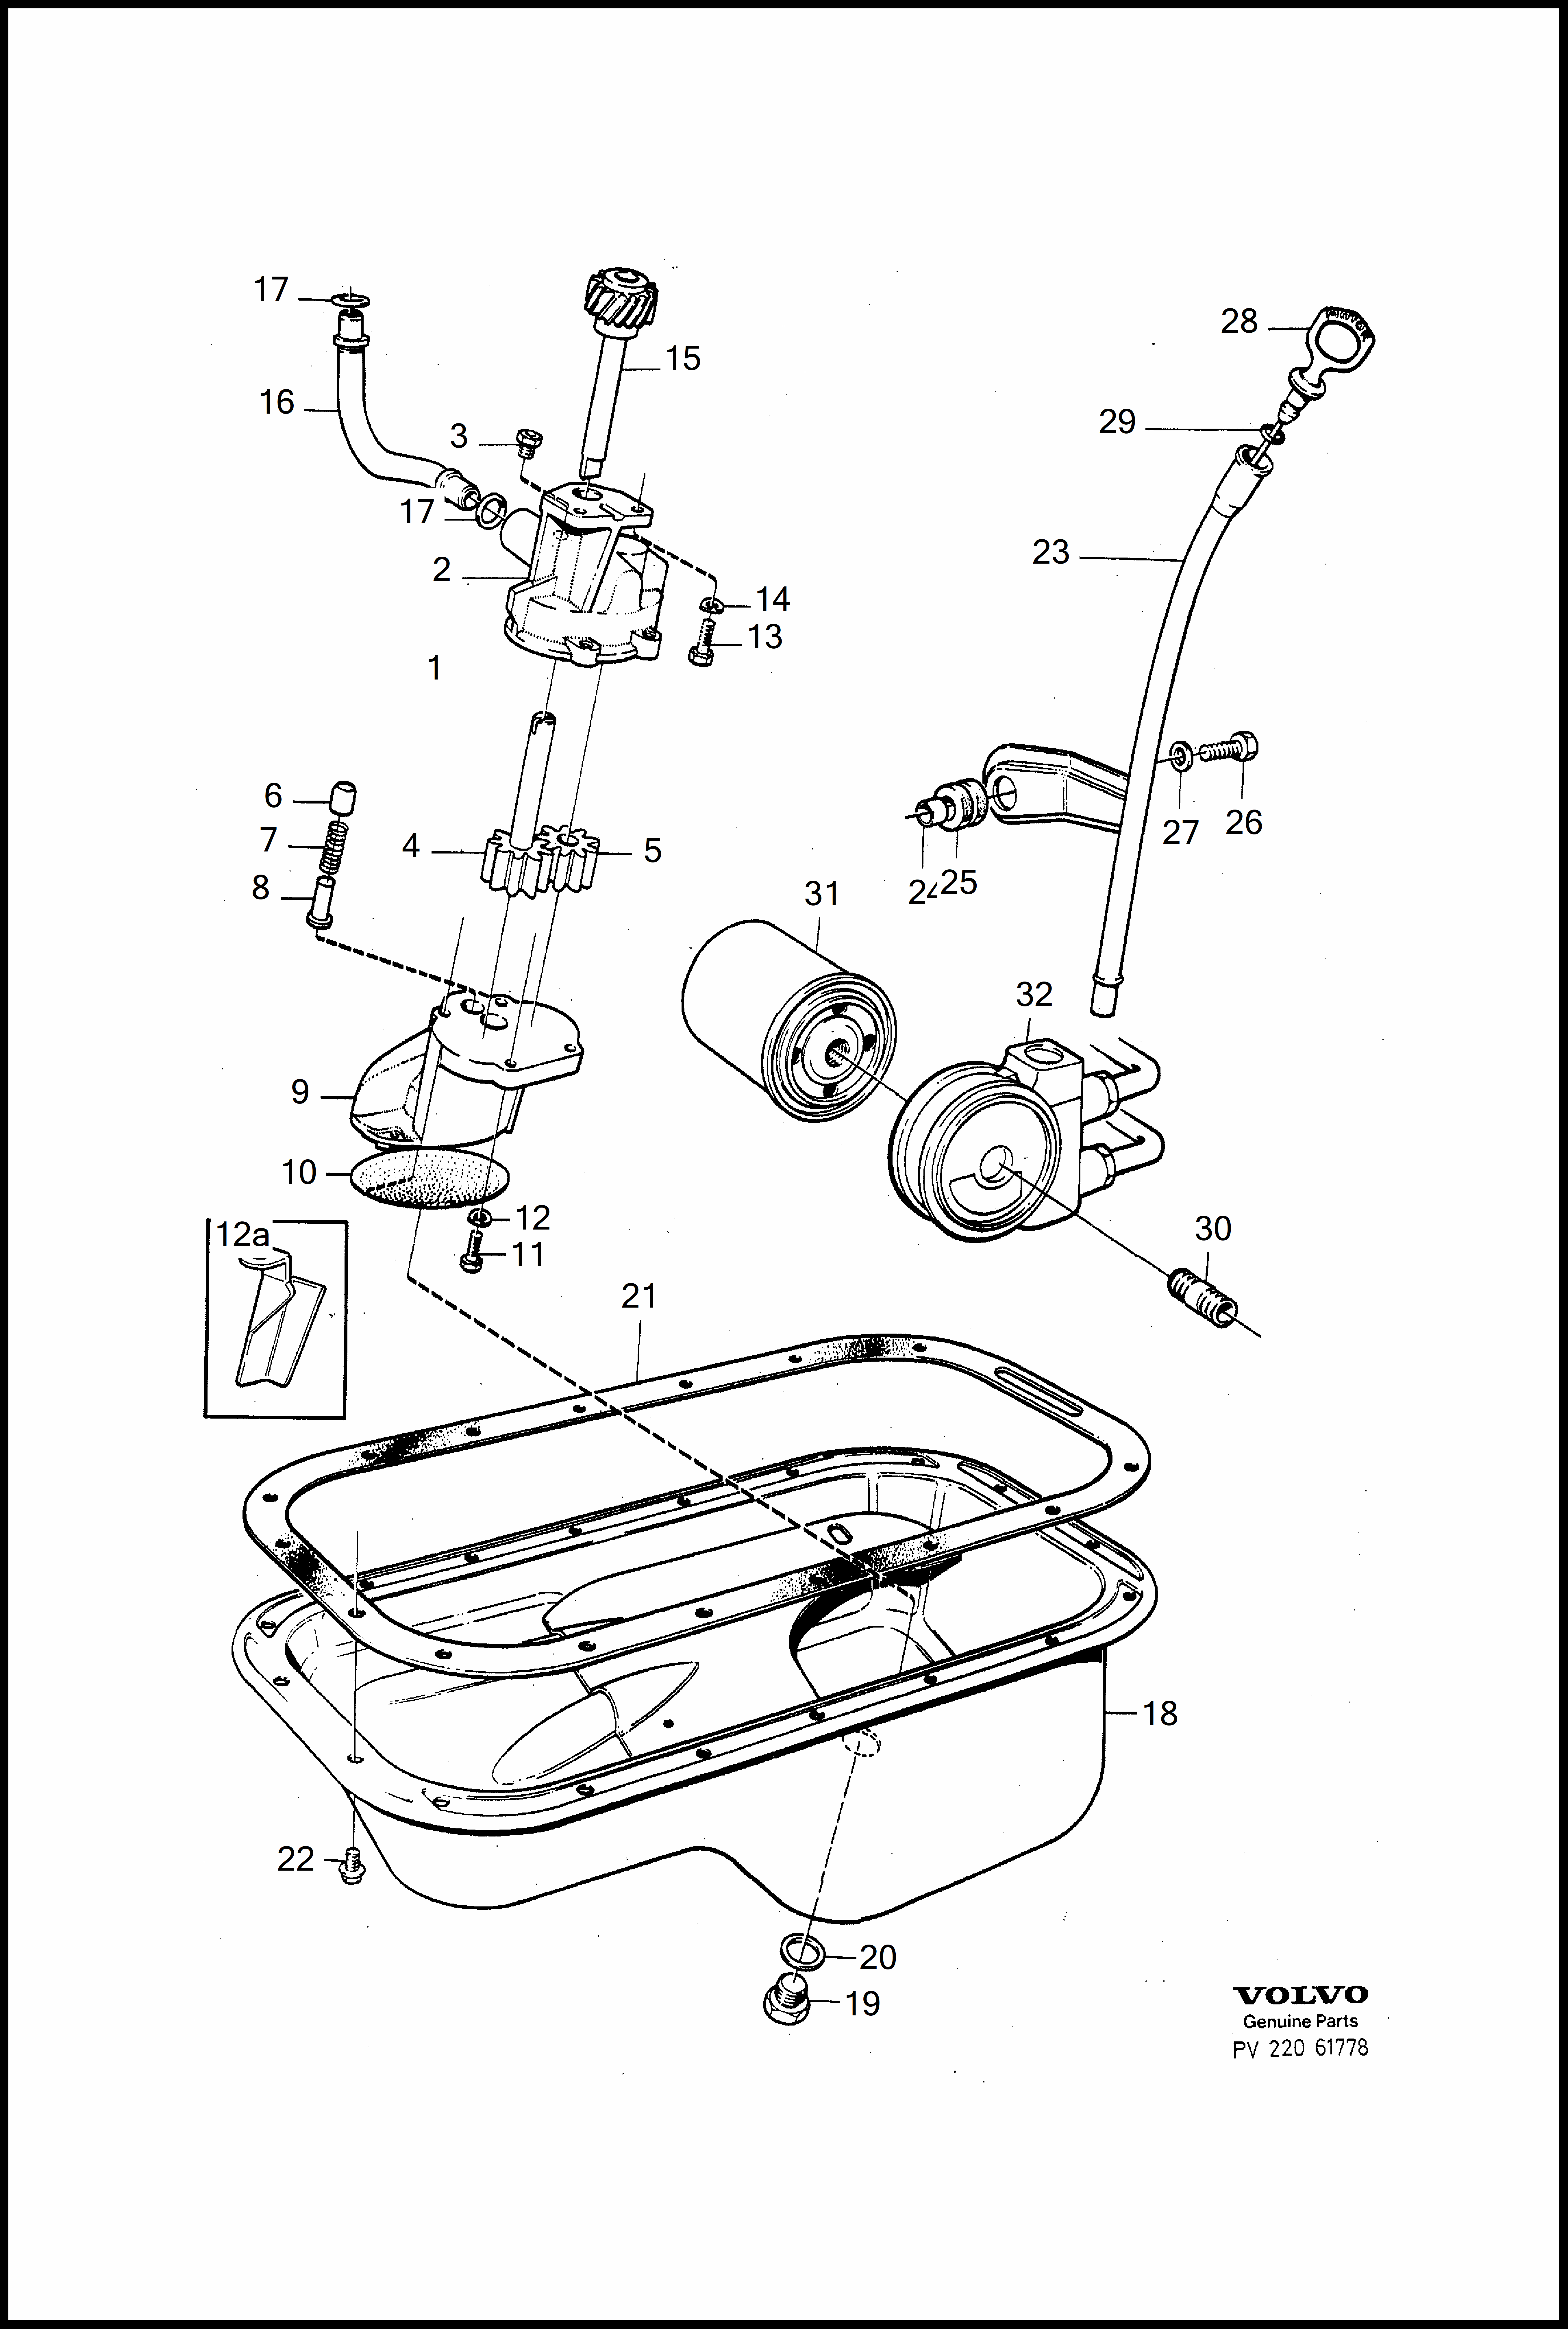 Lubricating system for Volvo 740 740